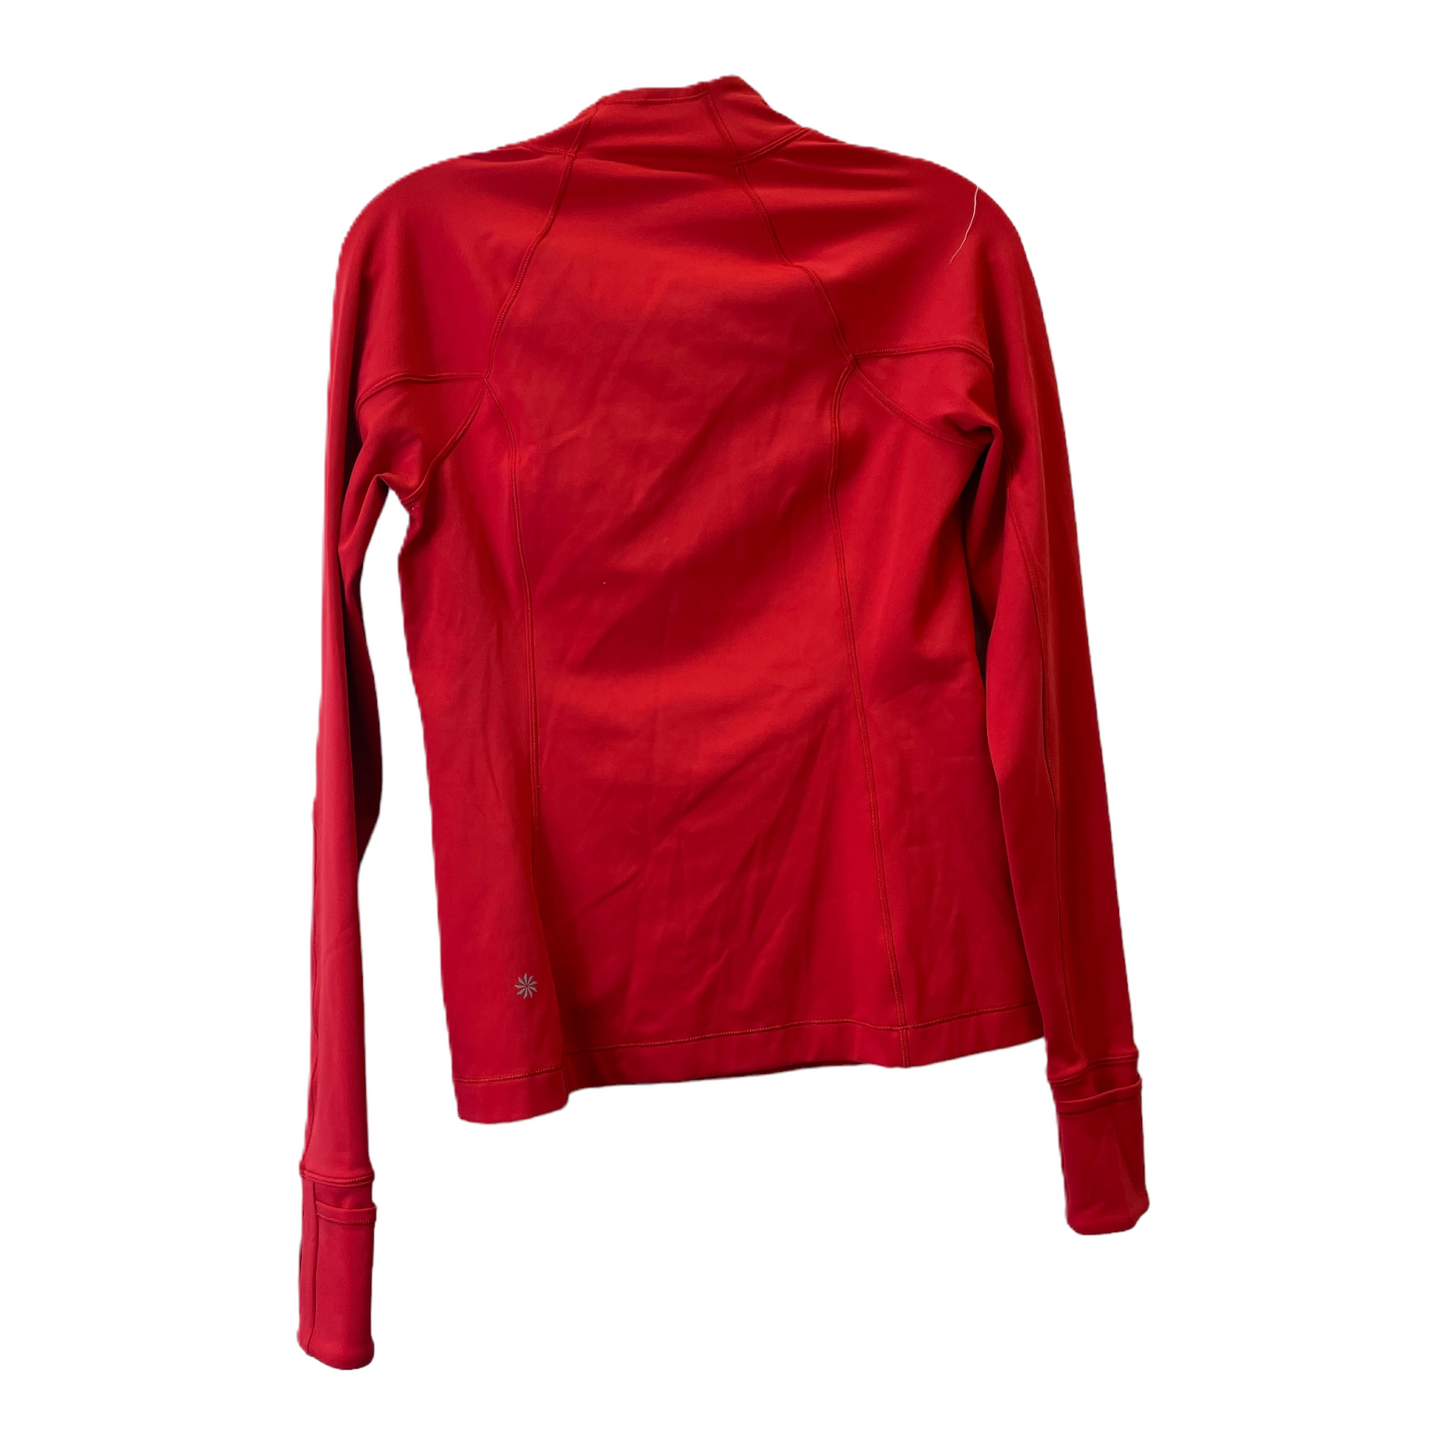 Red Athletic Top Long Sleeve Collar By Athleta, Size: Xs